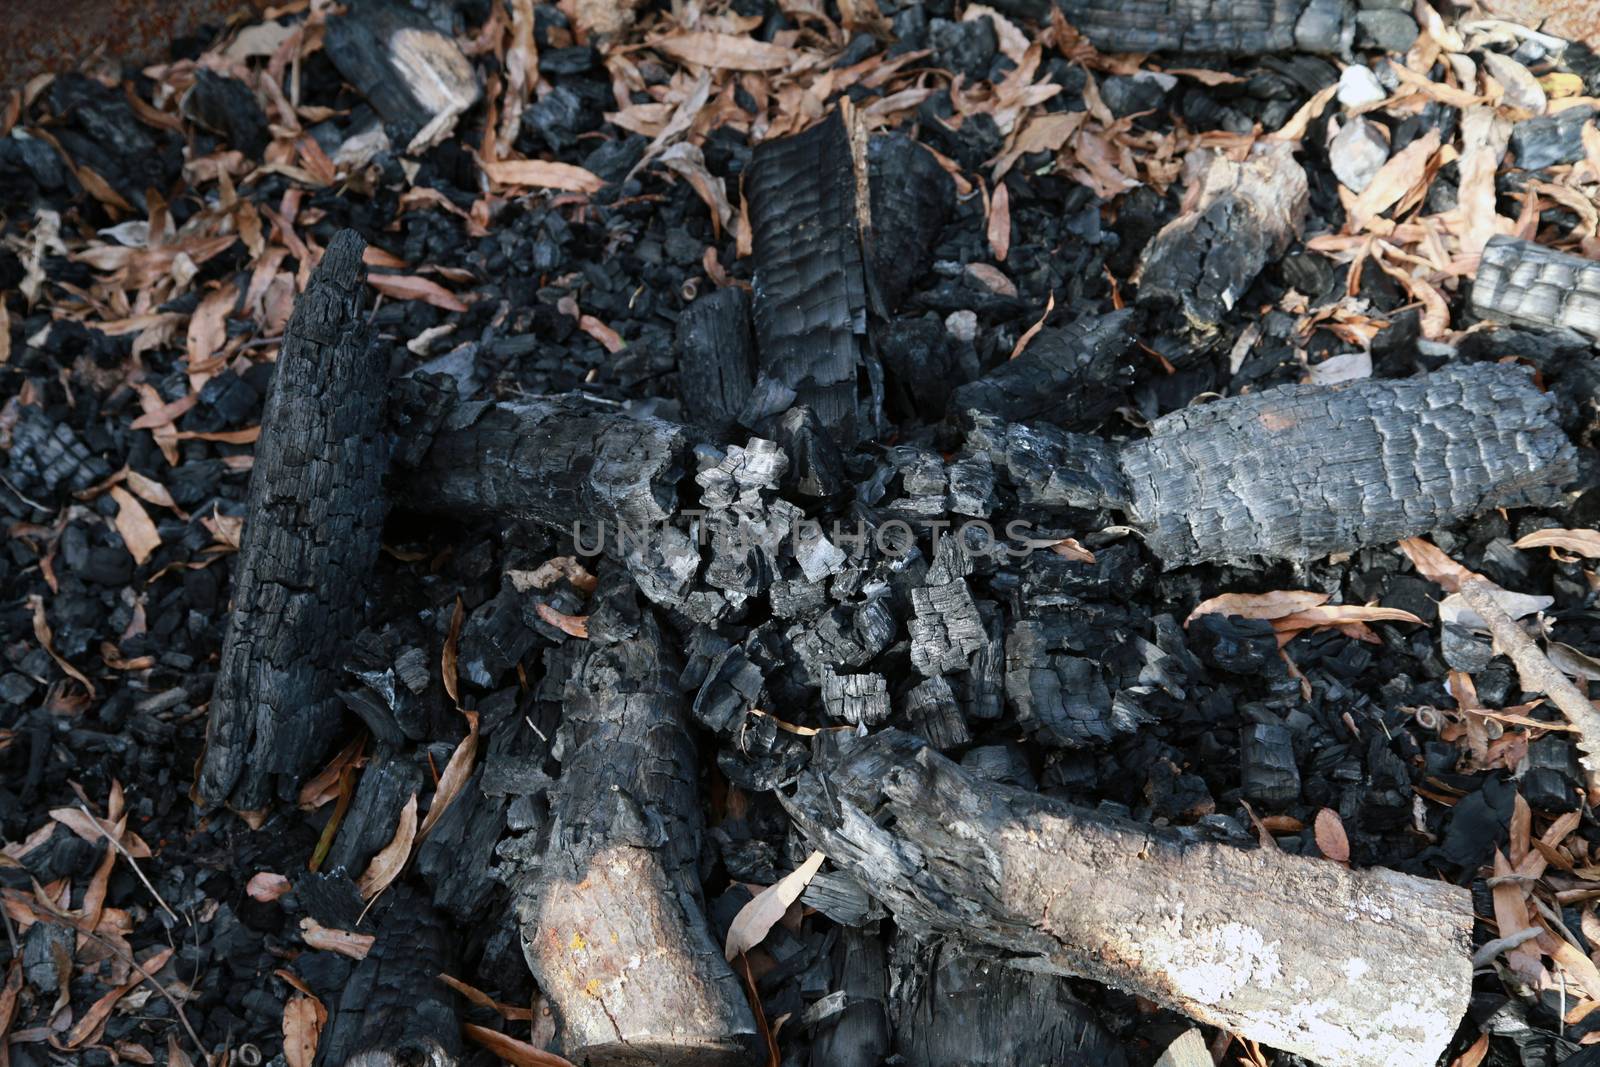 Remnants of burnt firewood at a campsite